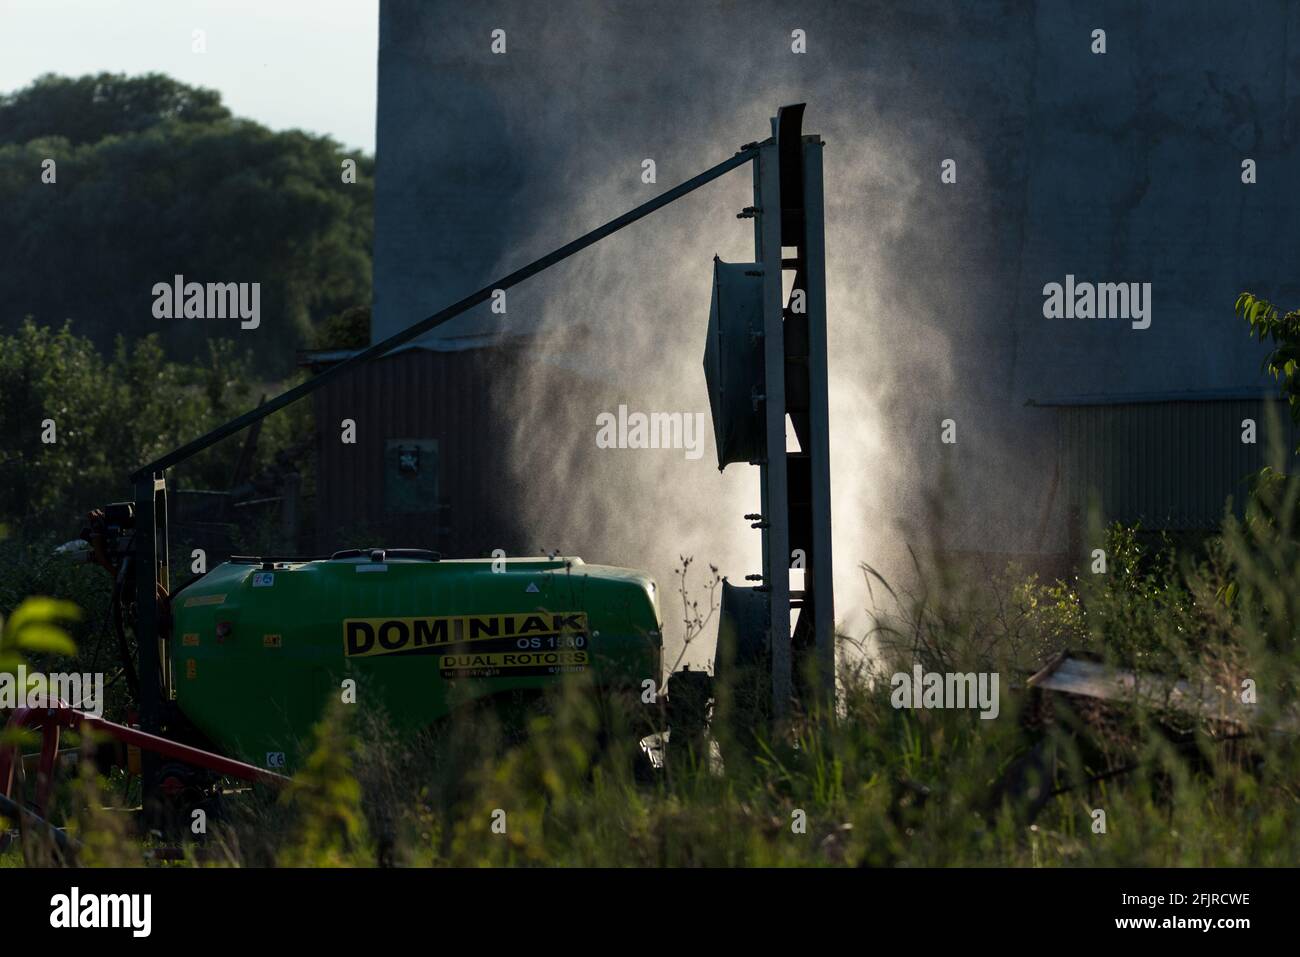 Rawa Mazowiecka, Poland - July 18, 2020: Spraying cherries. Protection of the orchard and trees against pests and diseases. Work on a fruit farm. Stock Photo